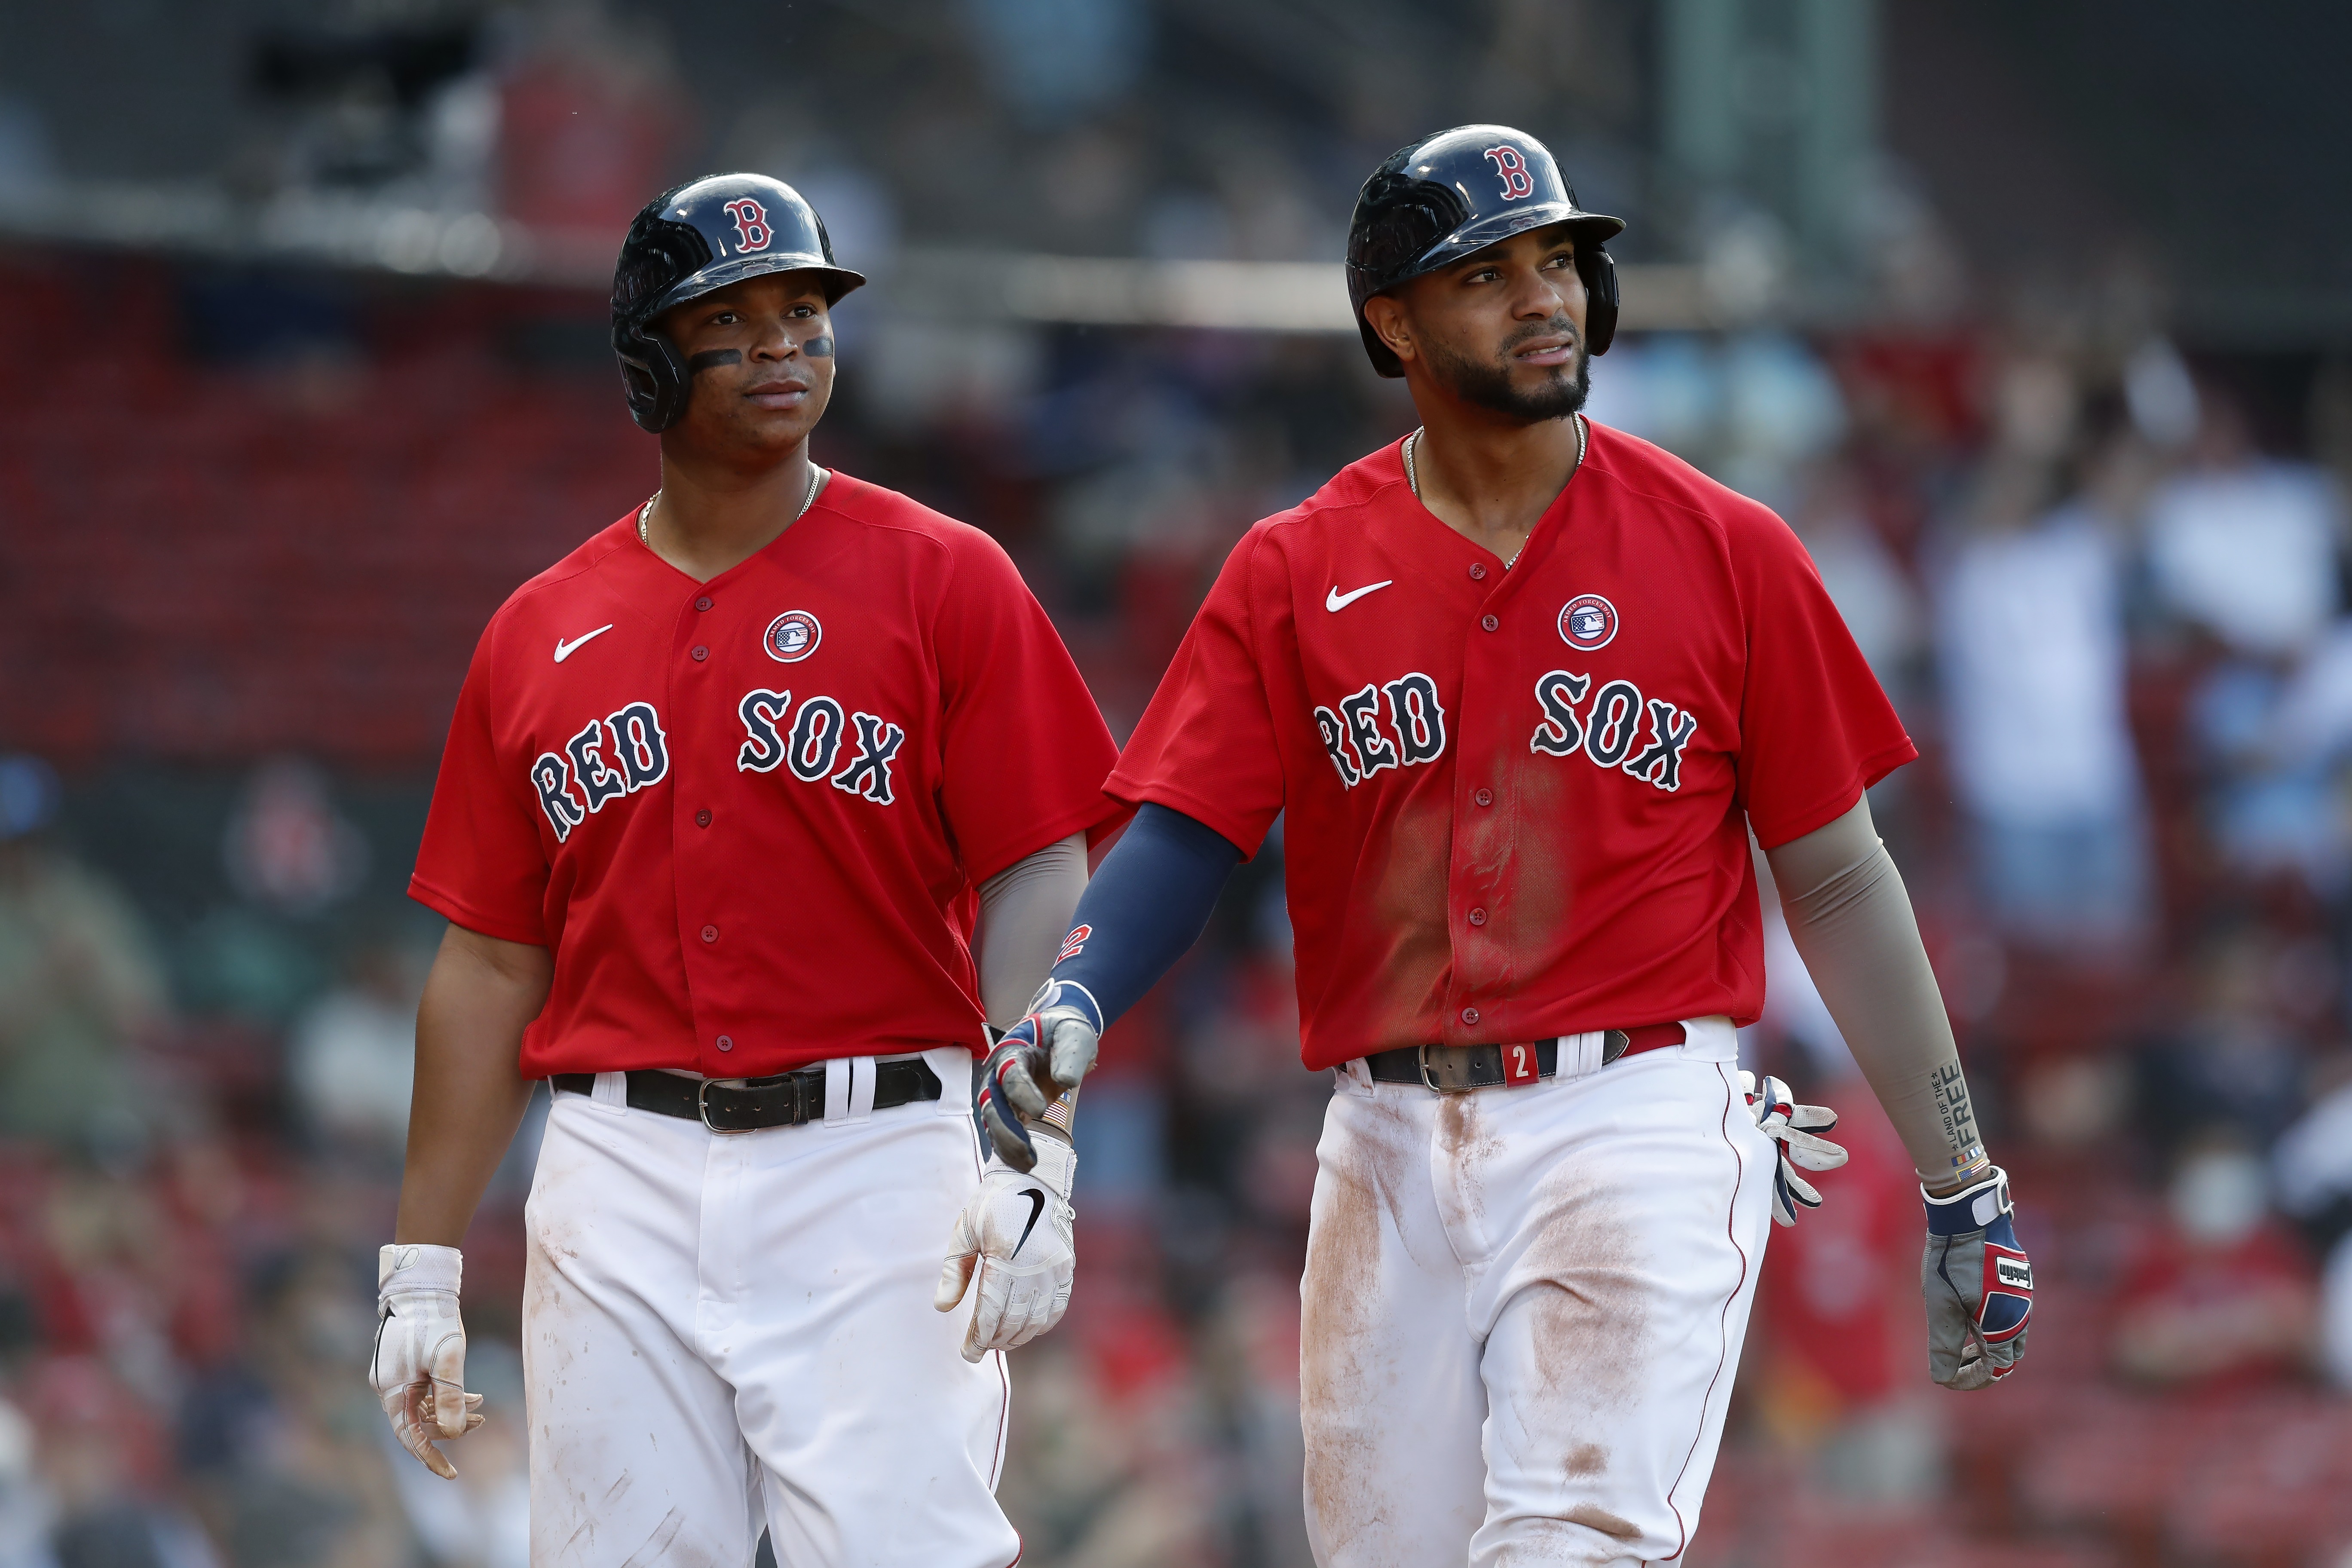 Red Sox sign Devers, the homegrown star who stuck around